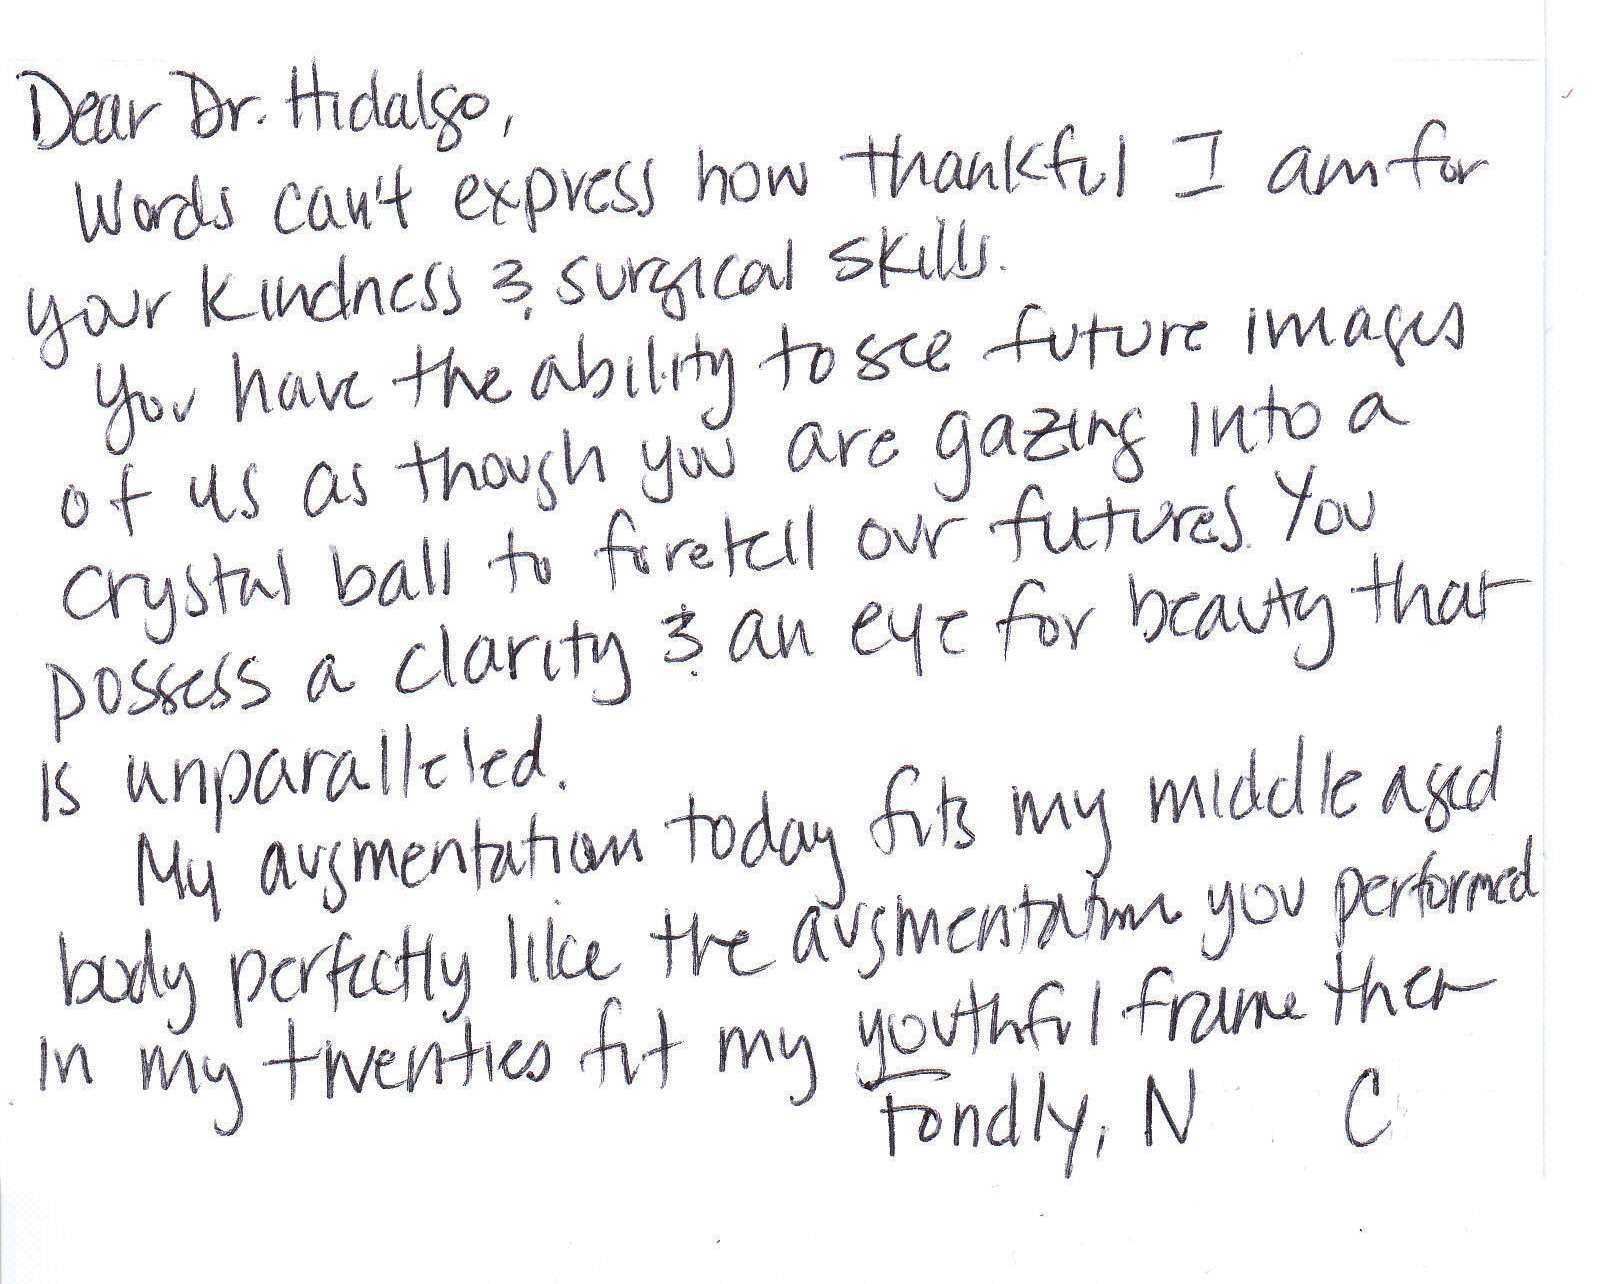 breast surgery note